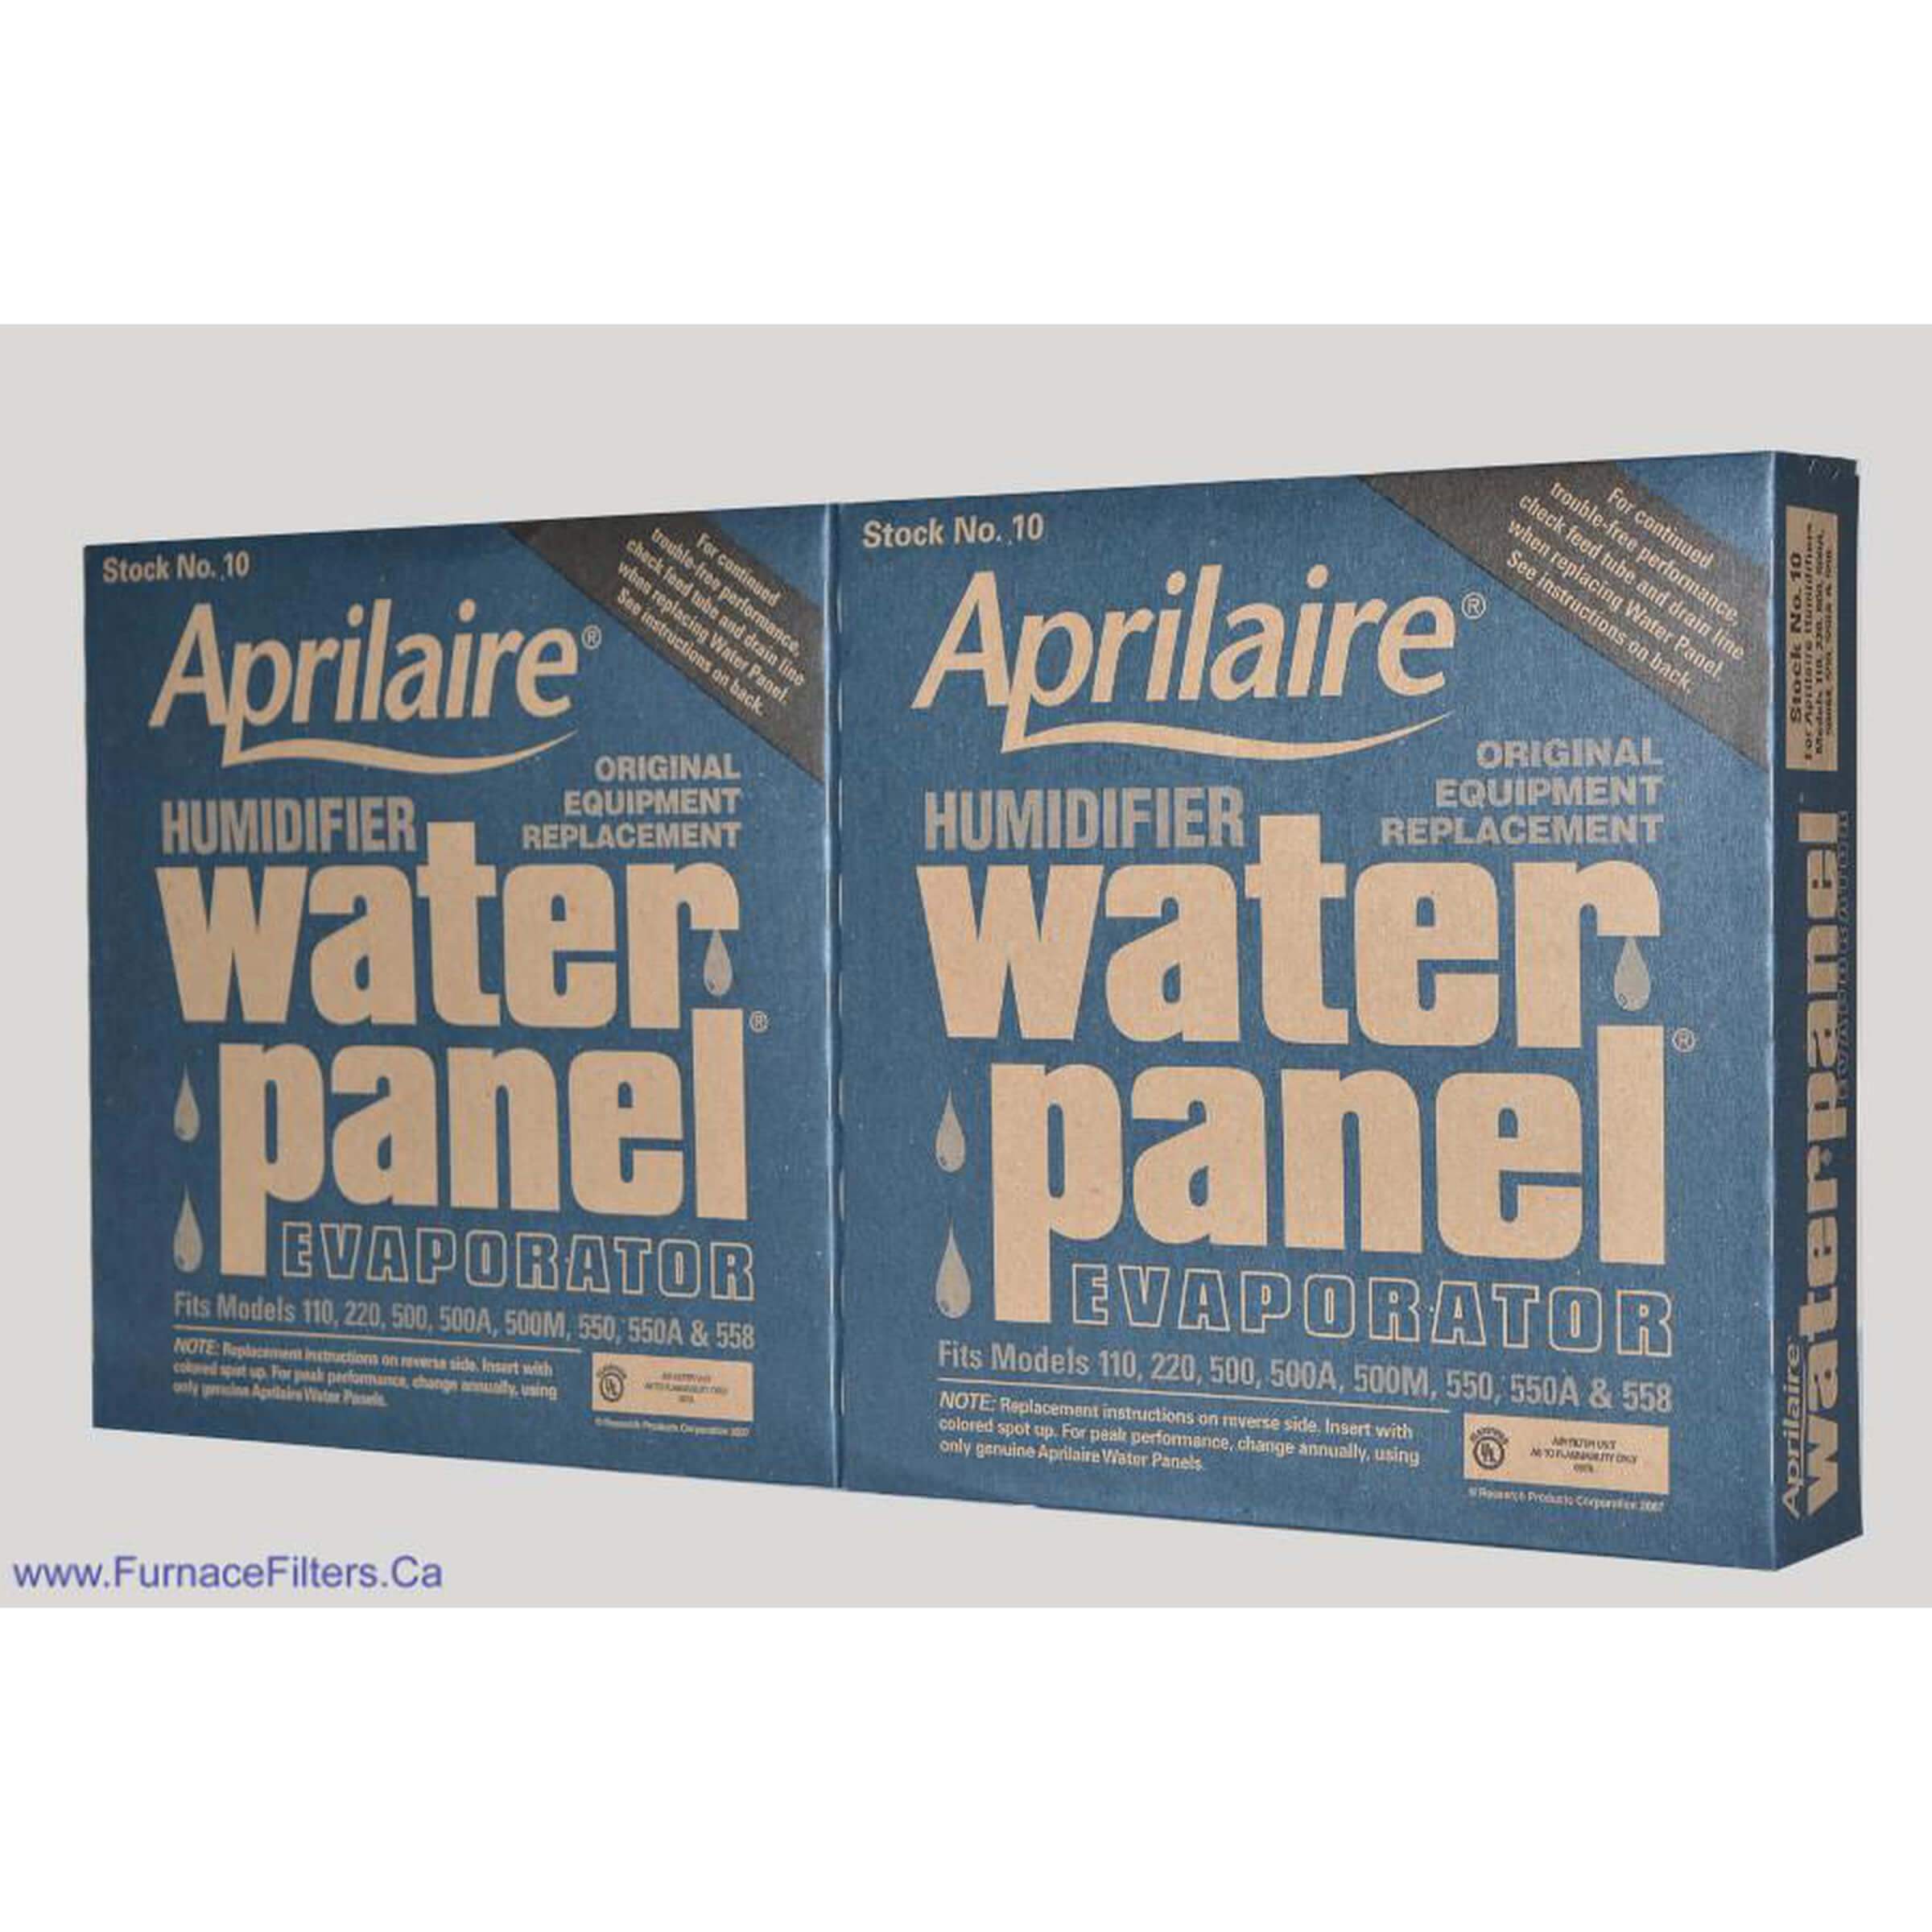 Aprilaire 10 Replacement Water Panel For Aprilaire Whole House Humidifier Models 110, 220, 500, 500a, 500m, 550, 550a, 558